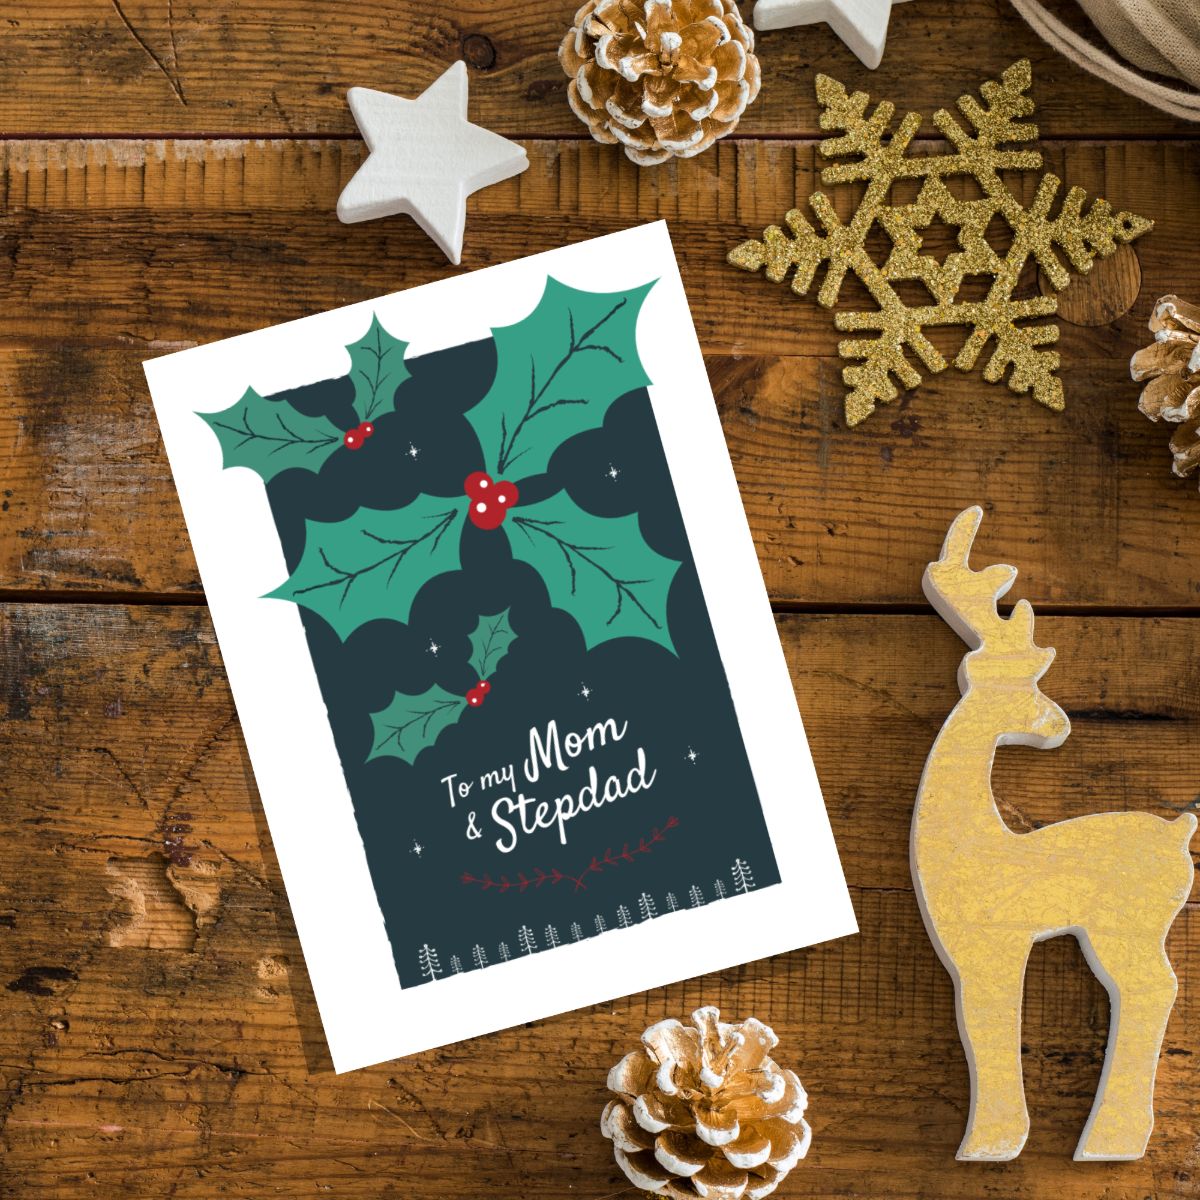 Mother and Stepdad Christmas Greetings Card